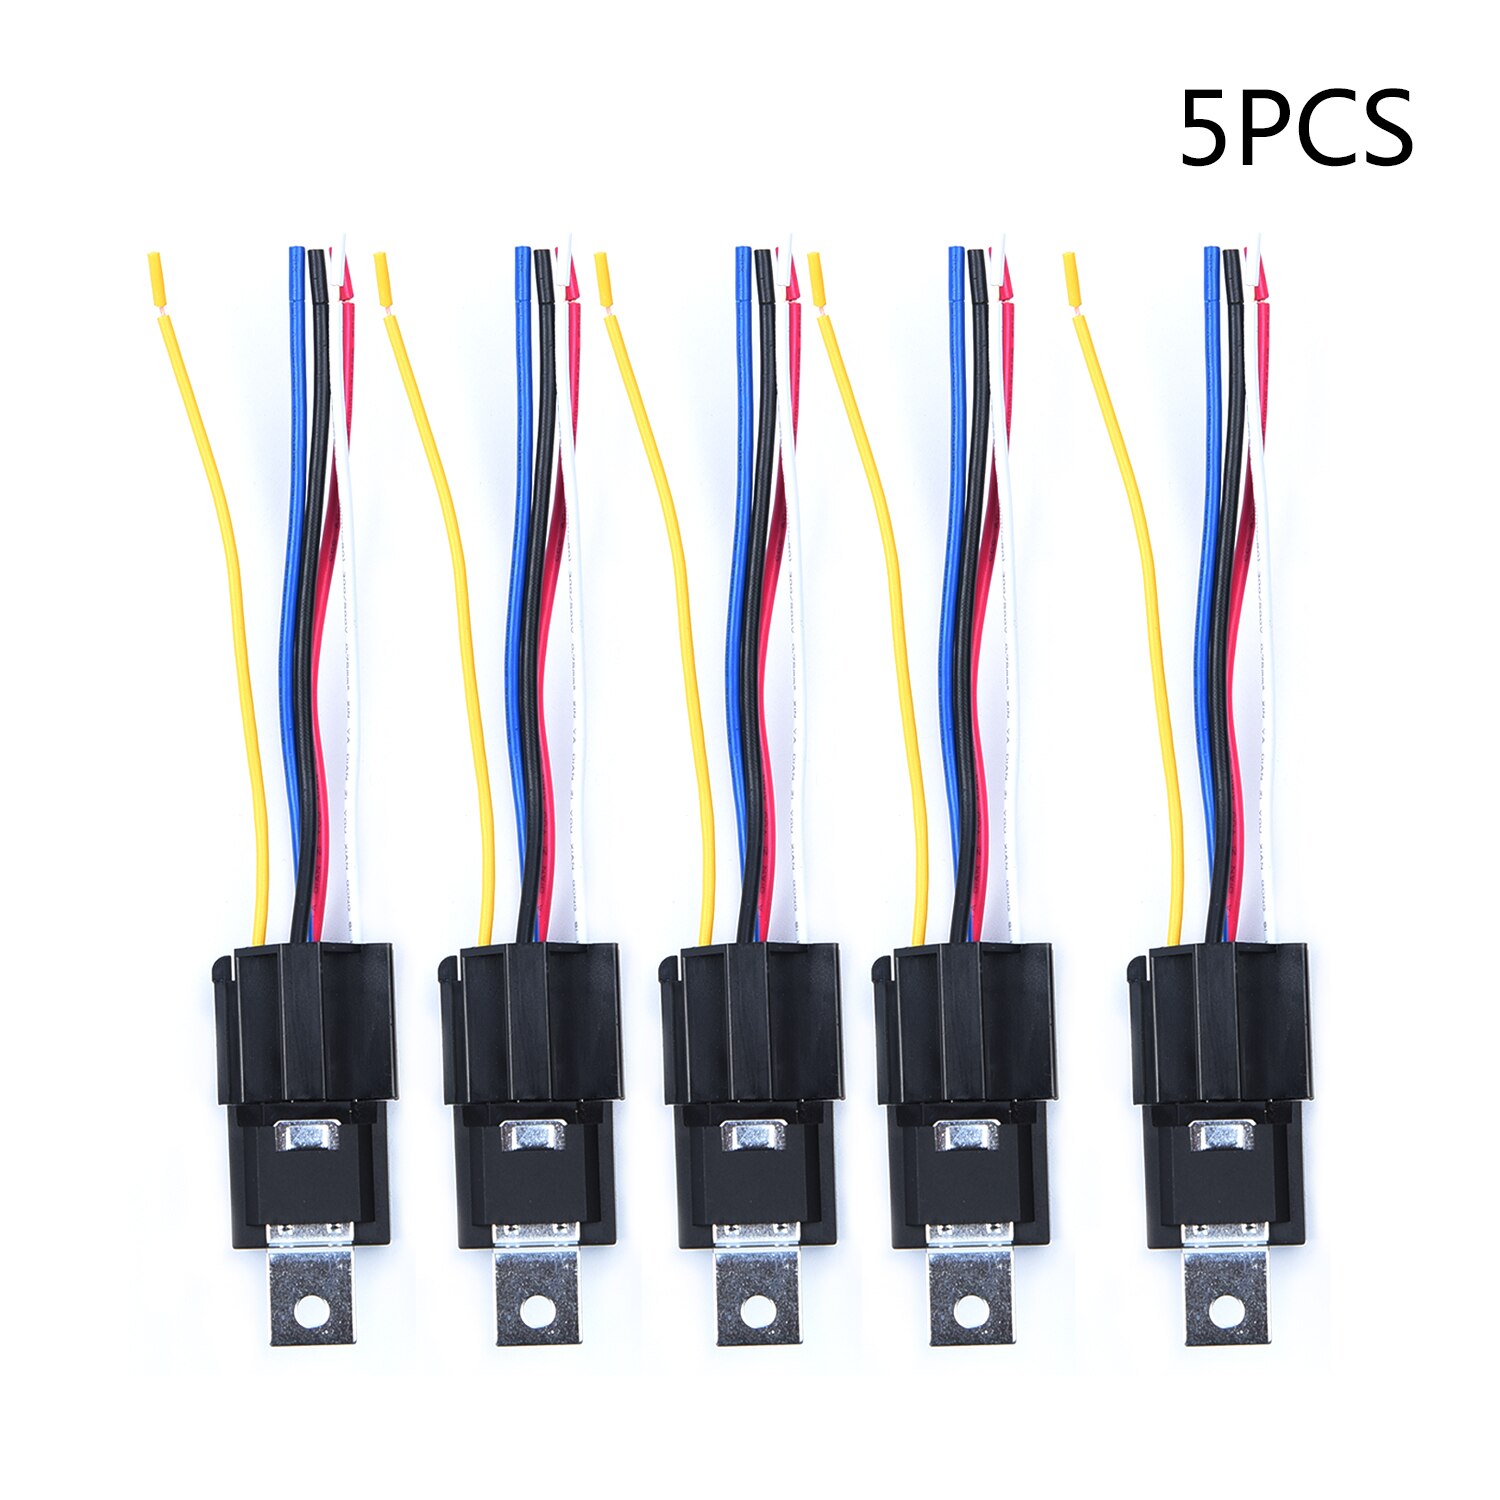 5X Auto Auto Spdt 12V 40A 5-Prong 5Pin Pre-Wired Relais Socket Harness Automotive